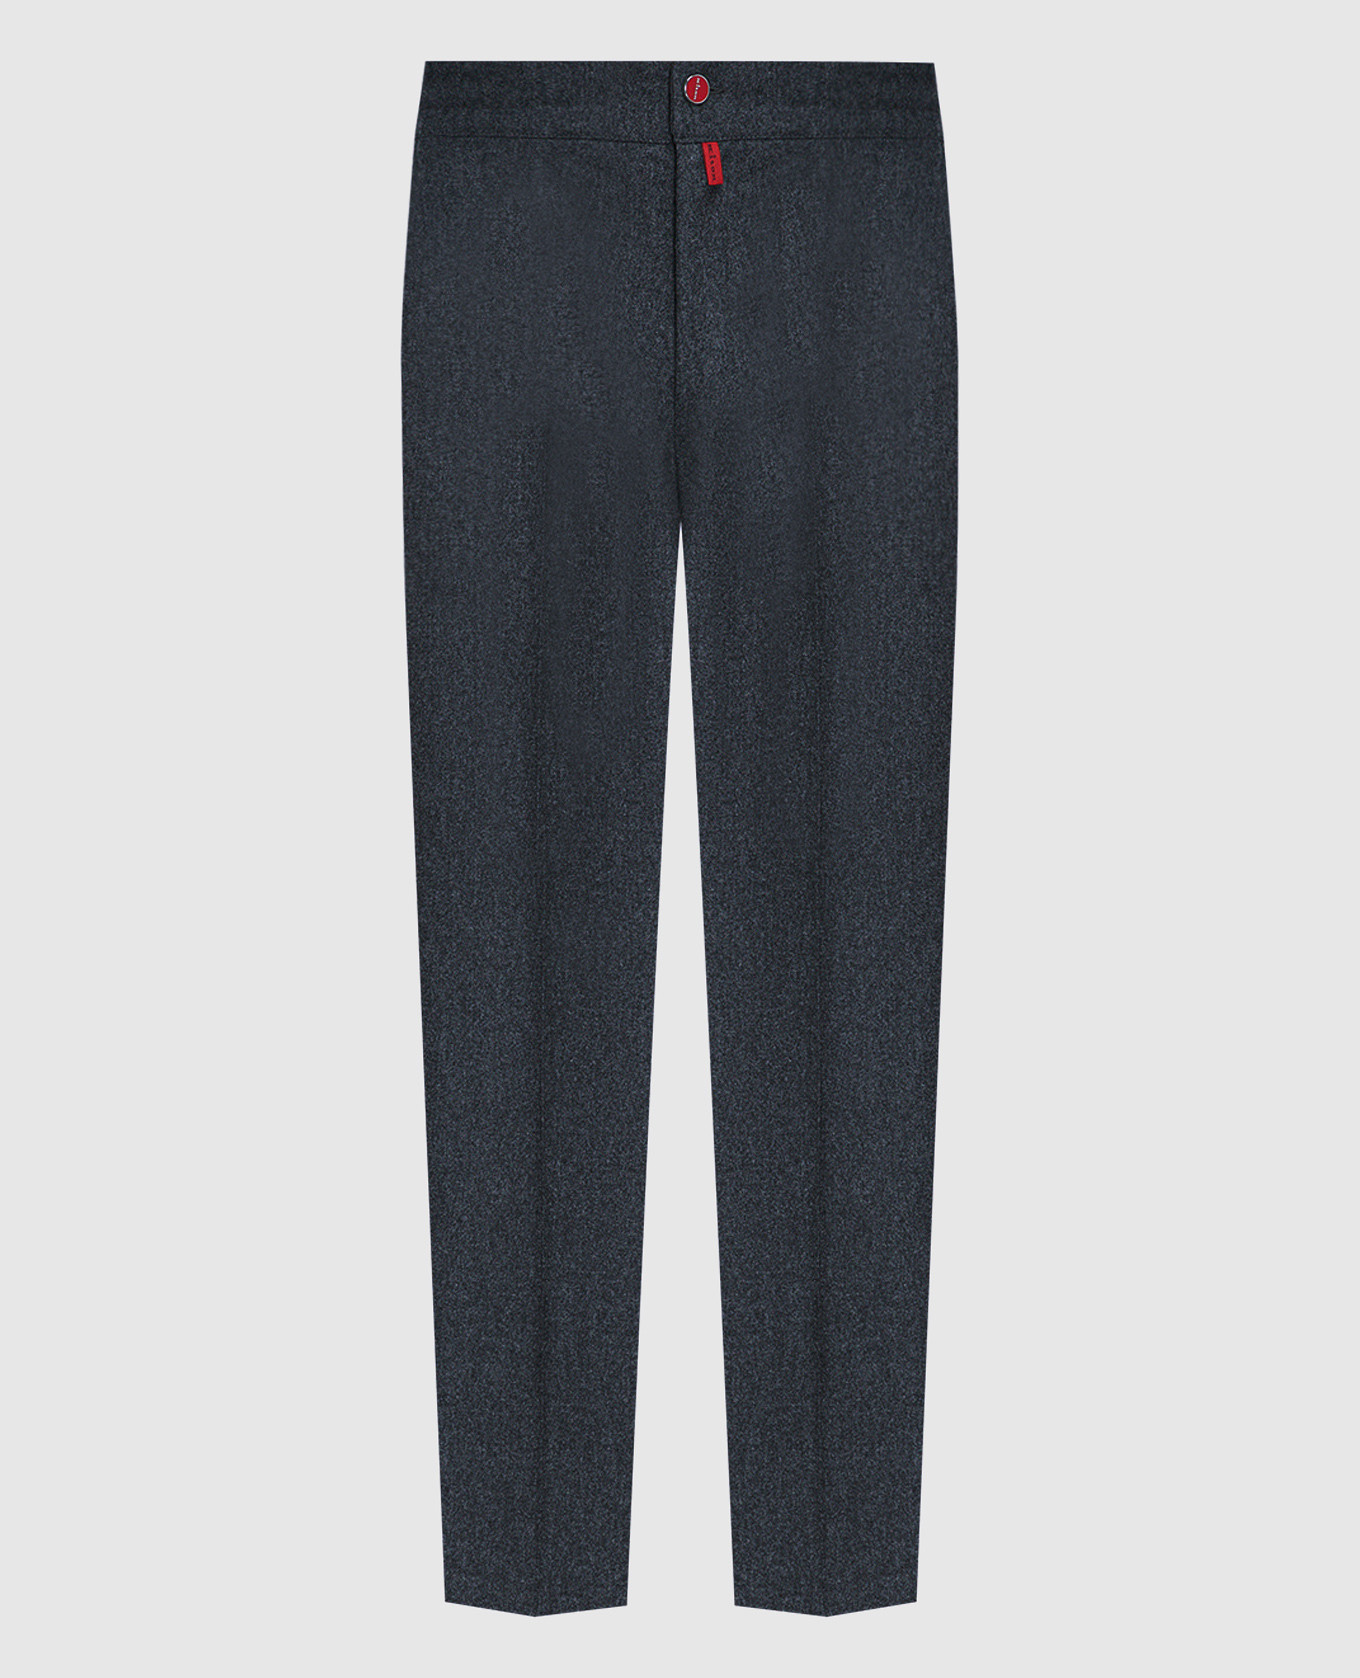 Gray wool trousers with logo patch